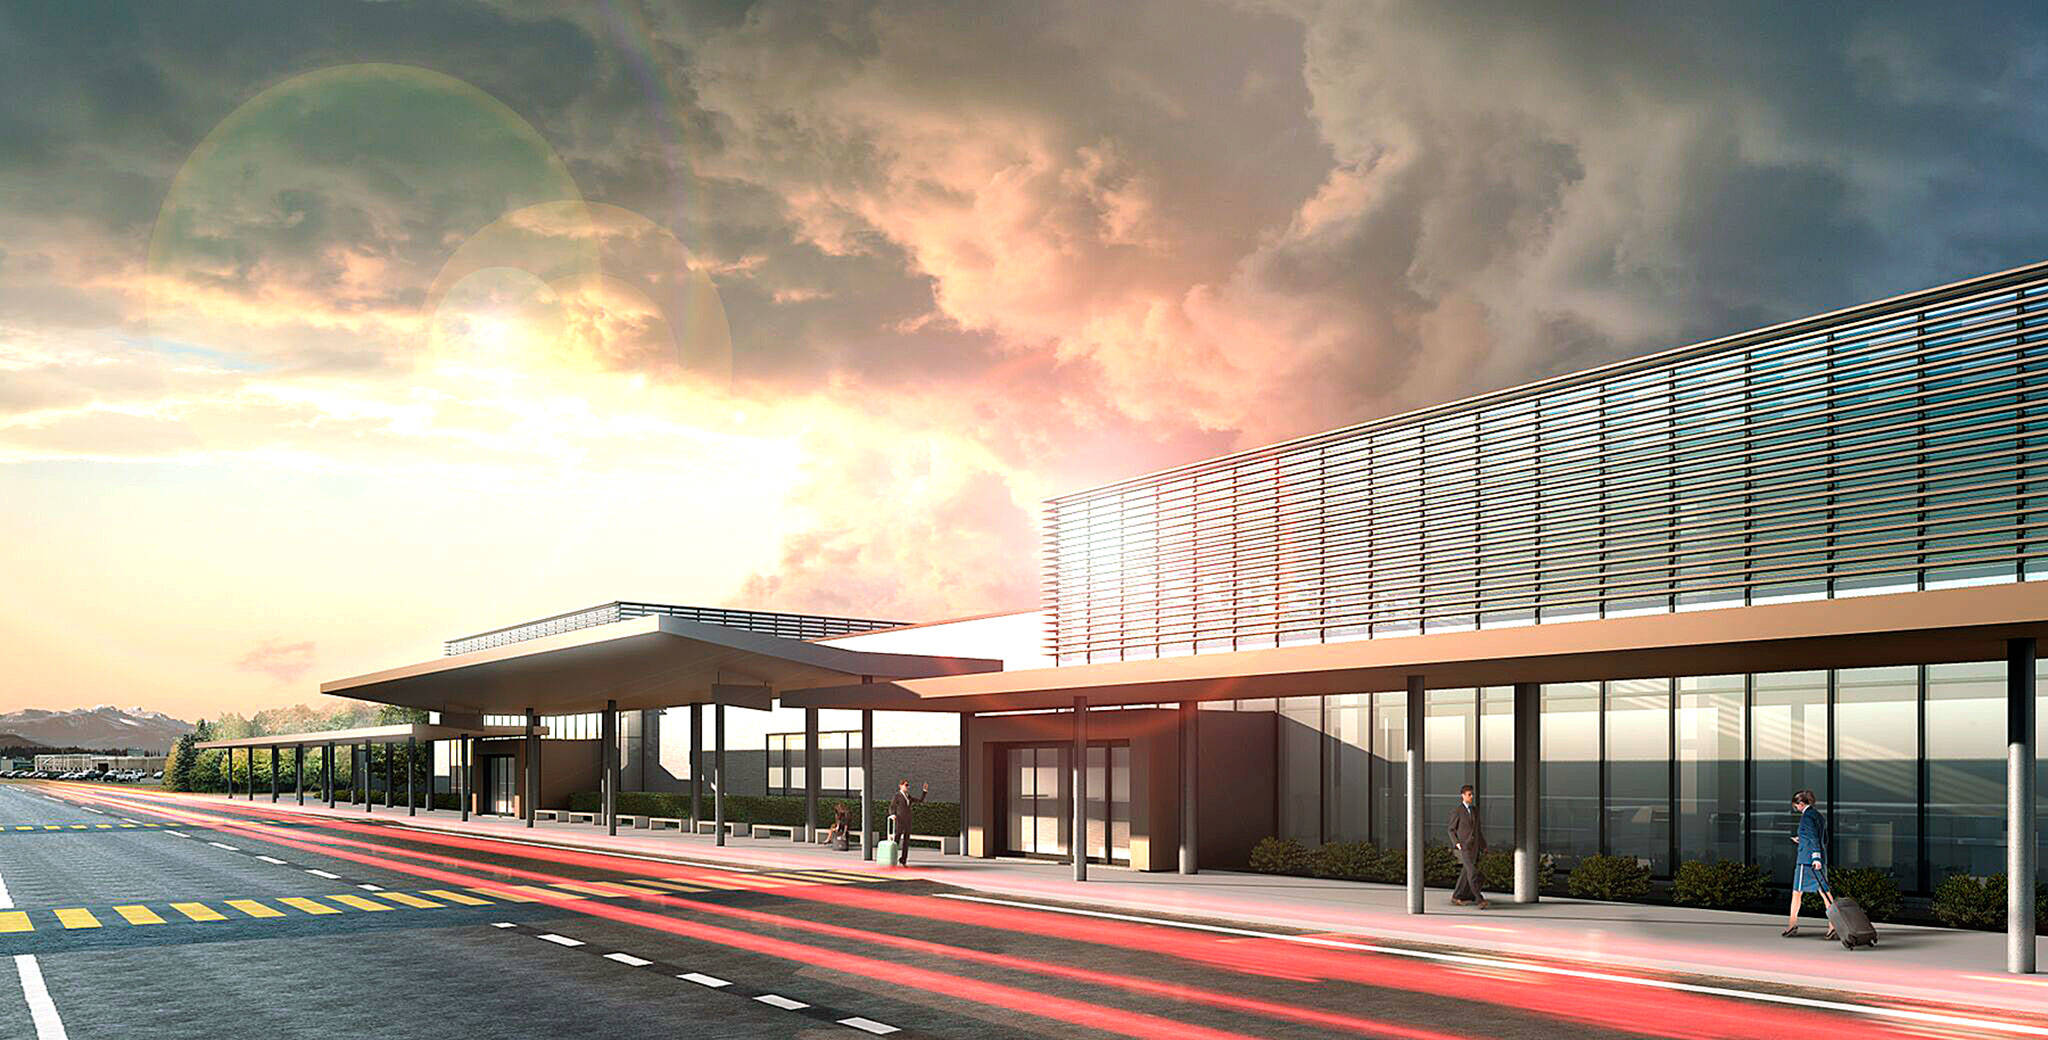 An artist’s rendering of the new passenger terminal at Paine Field in Everett. (Propeller Airports)